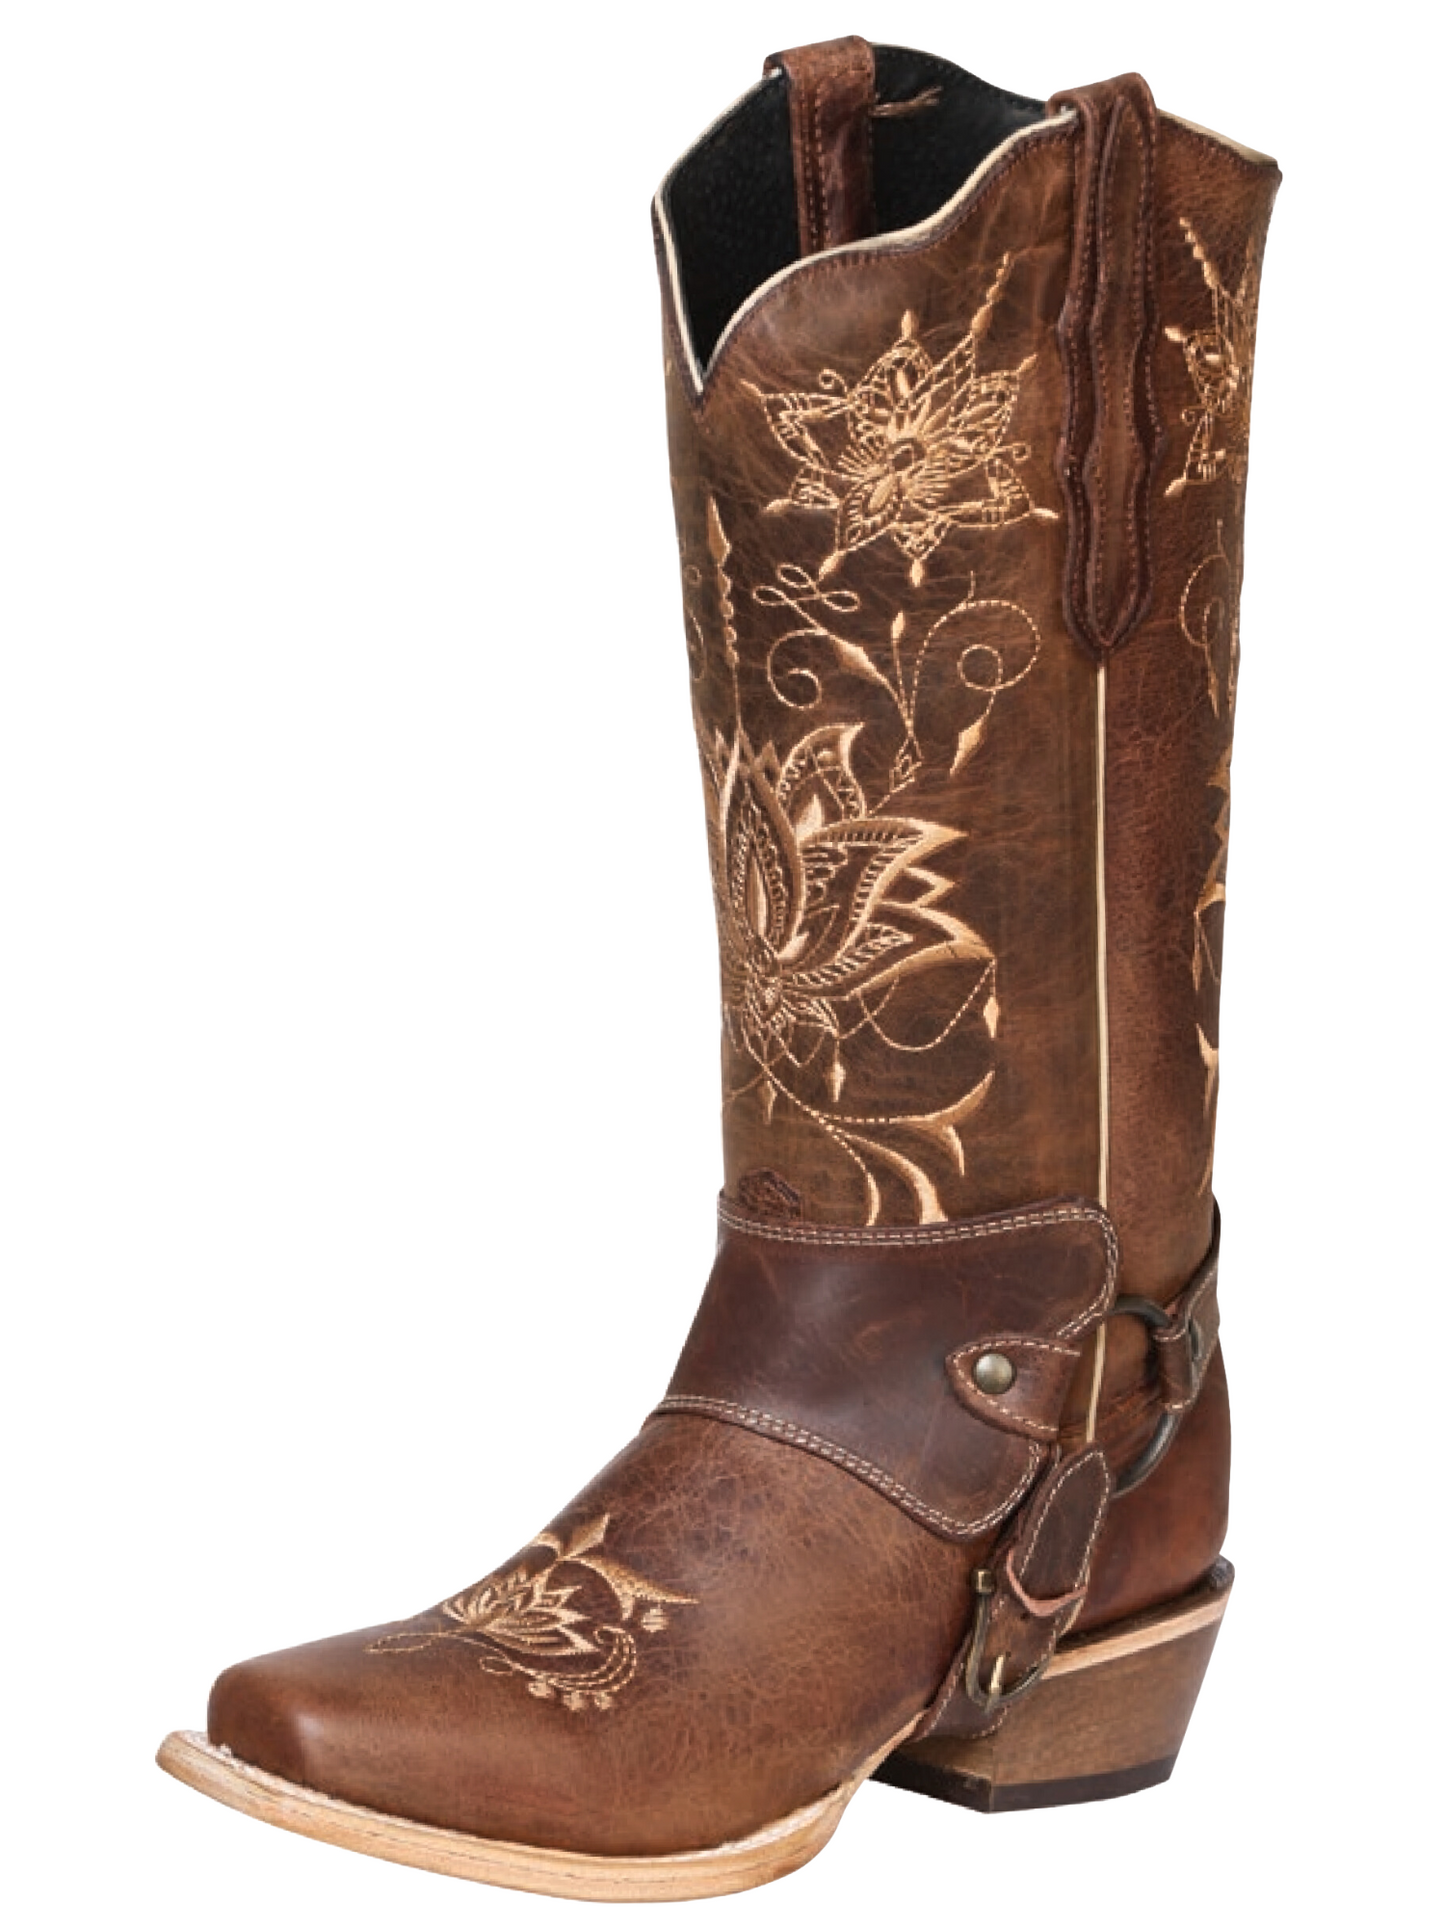 Rodeo Harness Cowboy Boots with Embroidered Genuine Leather Tube for Women 'El General' - ID: 41907